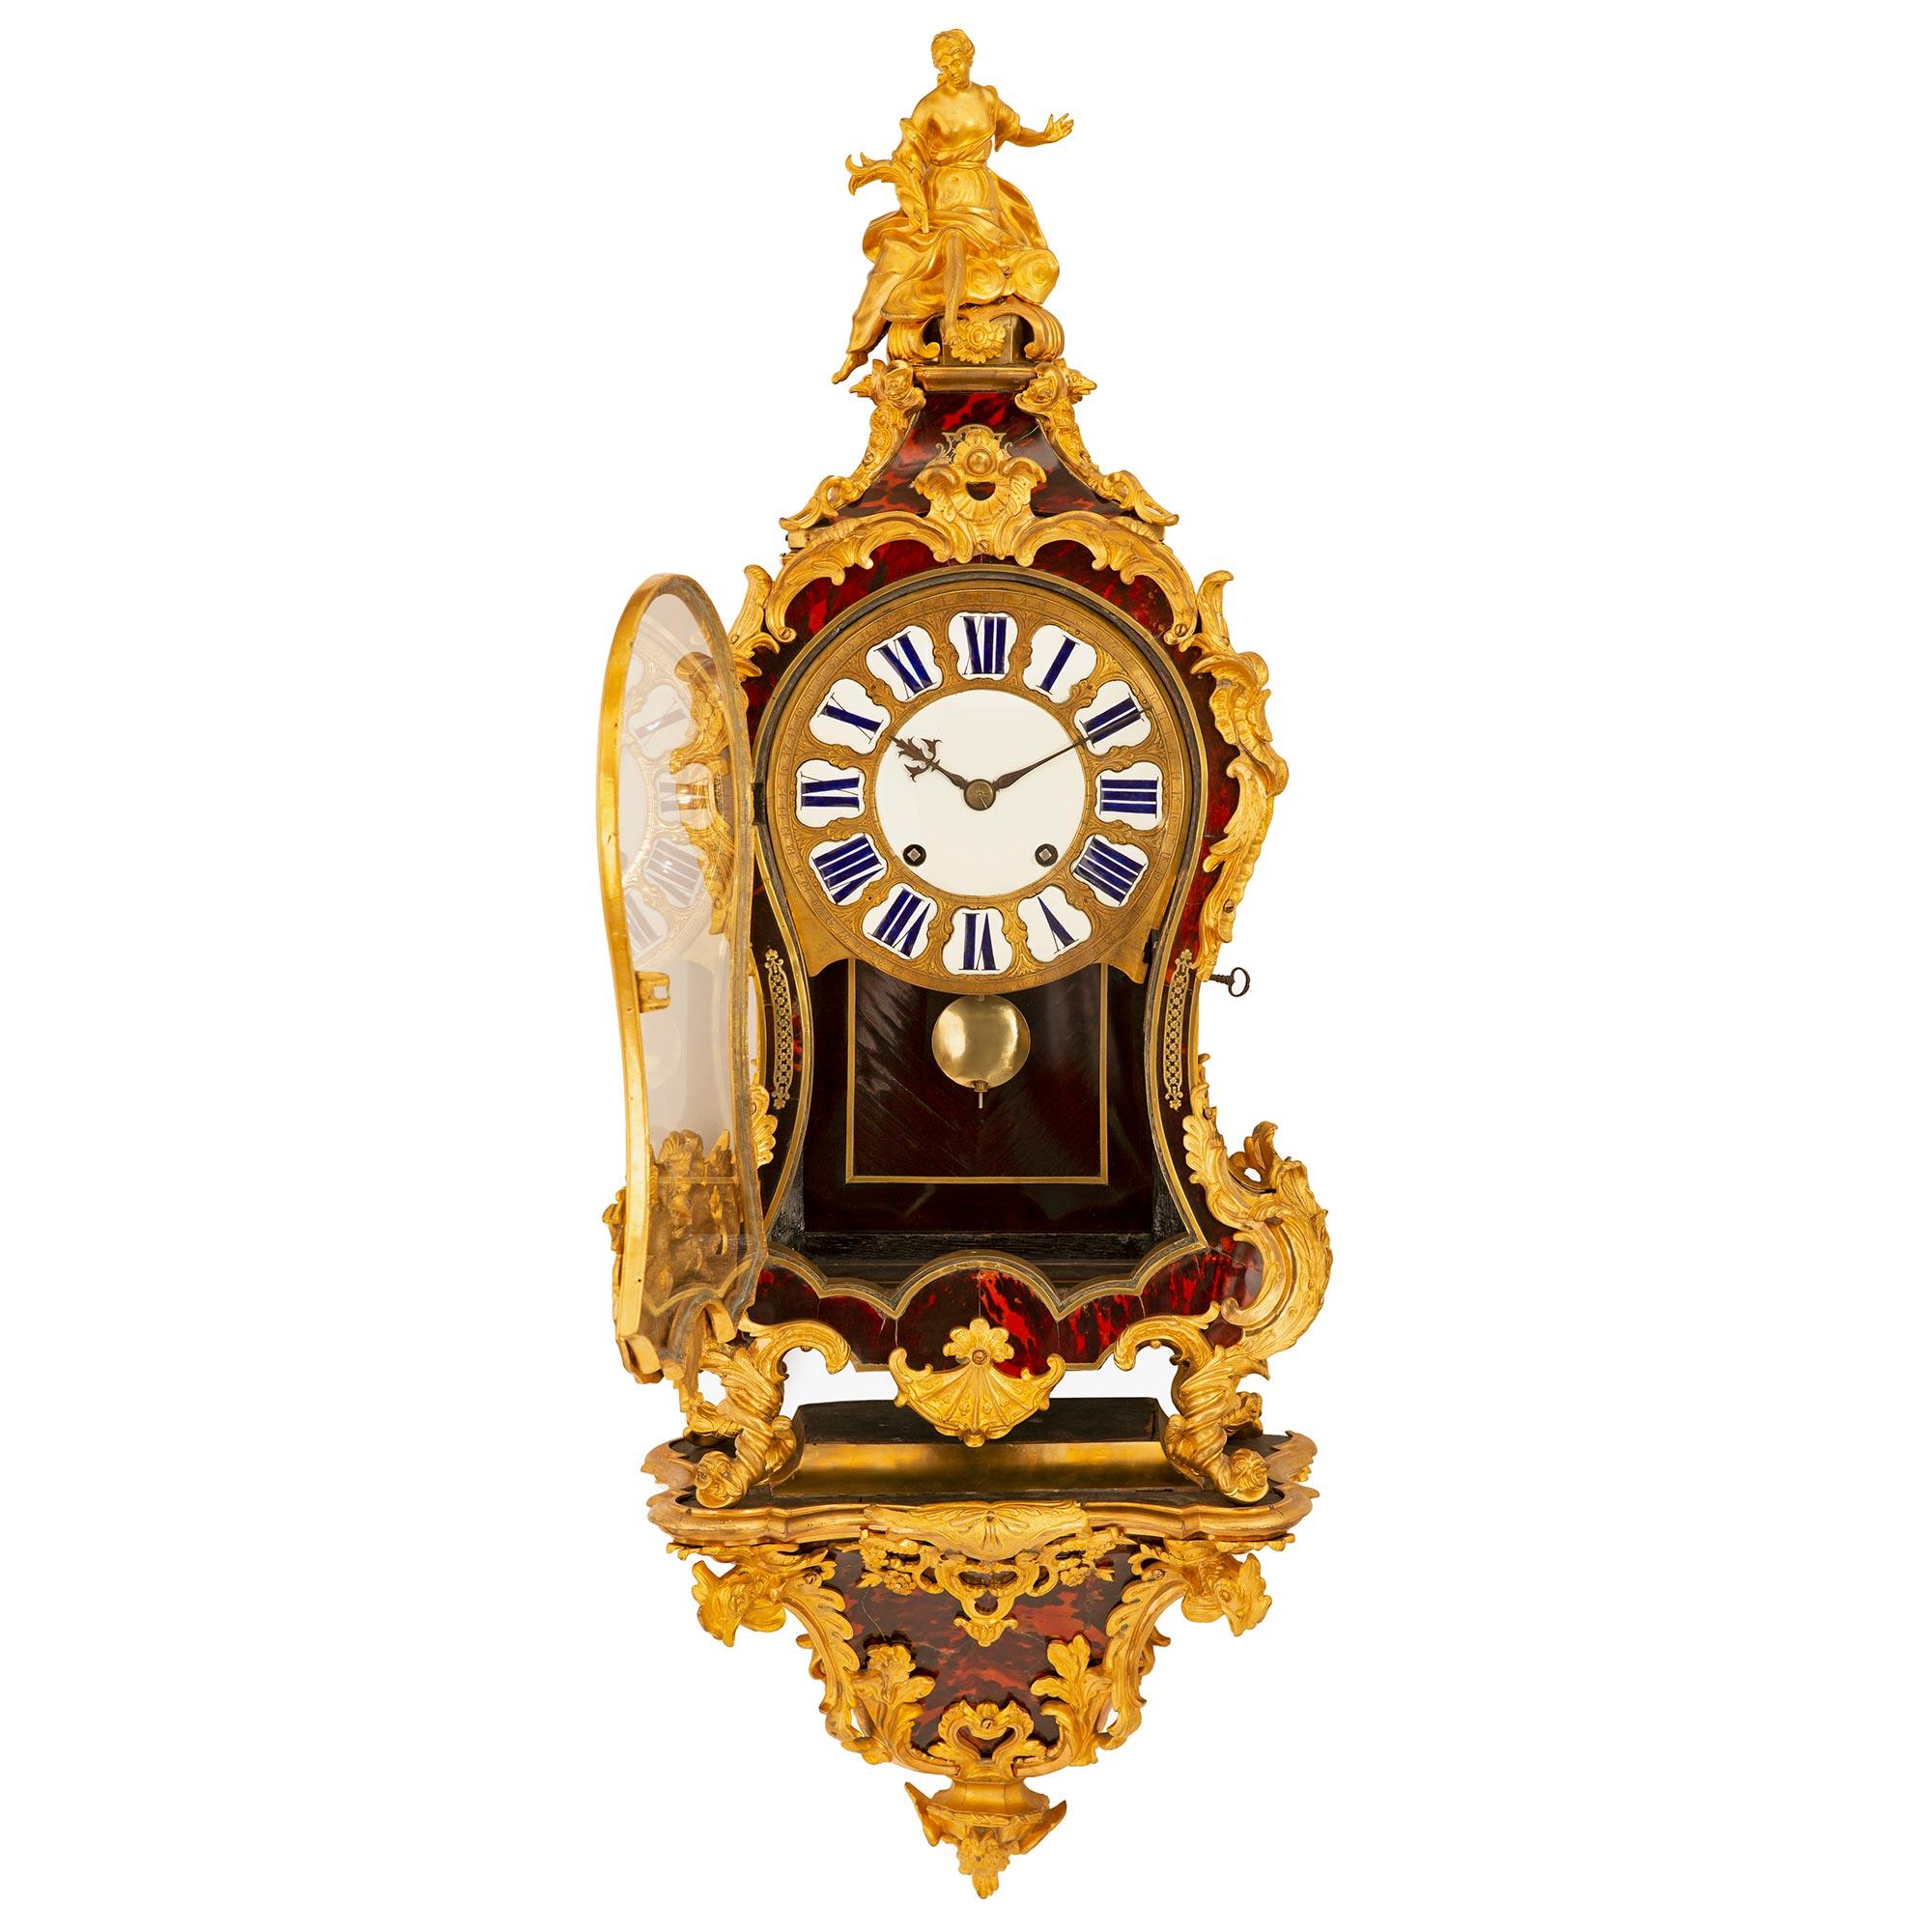 A spectacular and extremely high quality French early 18th century Louis XV period tortoise shell and ormolu mounted Cartel clock. The impressive clock rests on its original wall mounted bracket with a bottom ormolu finial of an owl below four 'S'